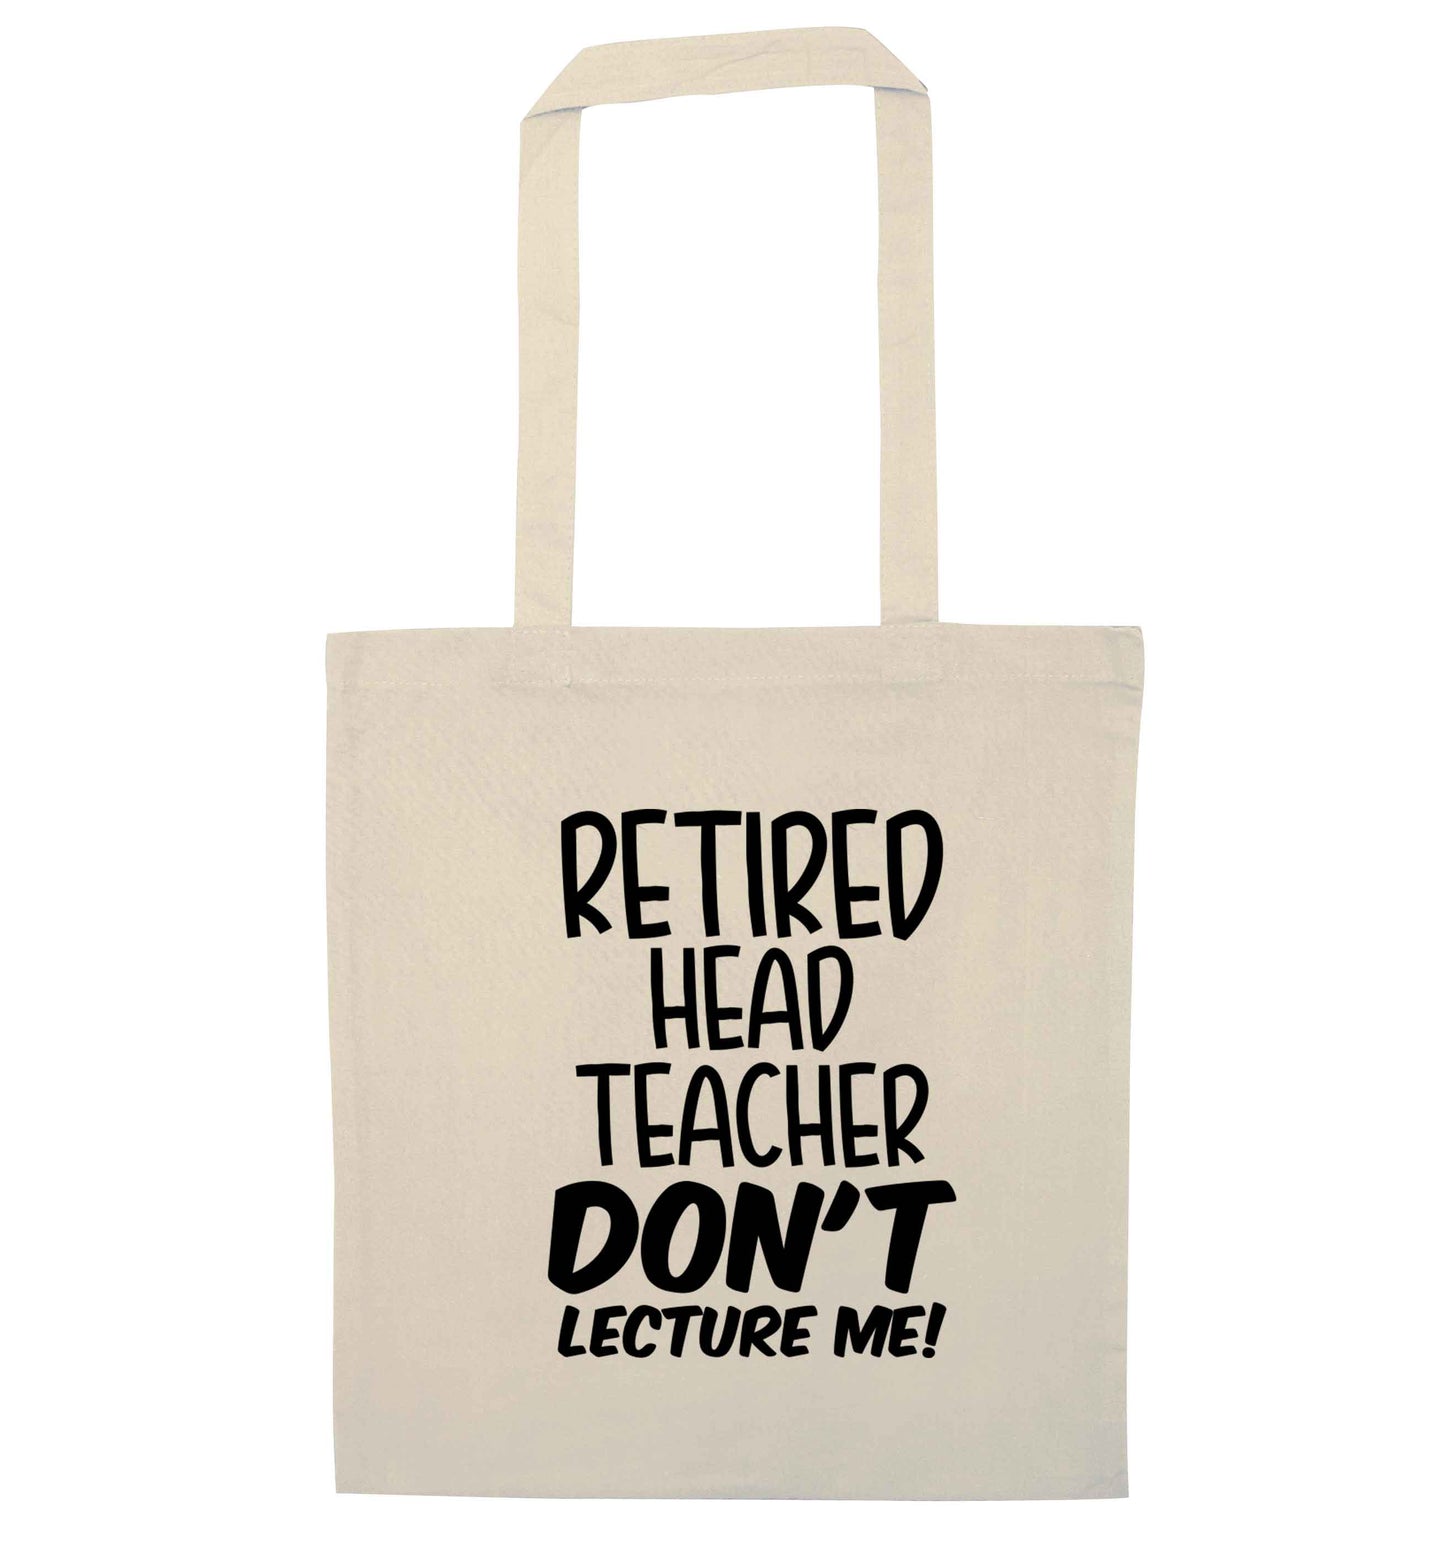 Retired head teacher don't lecture me! natural tote bag